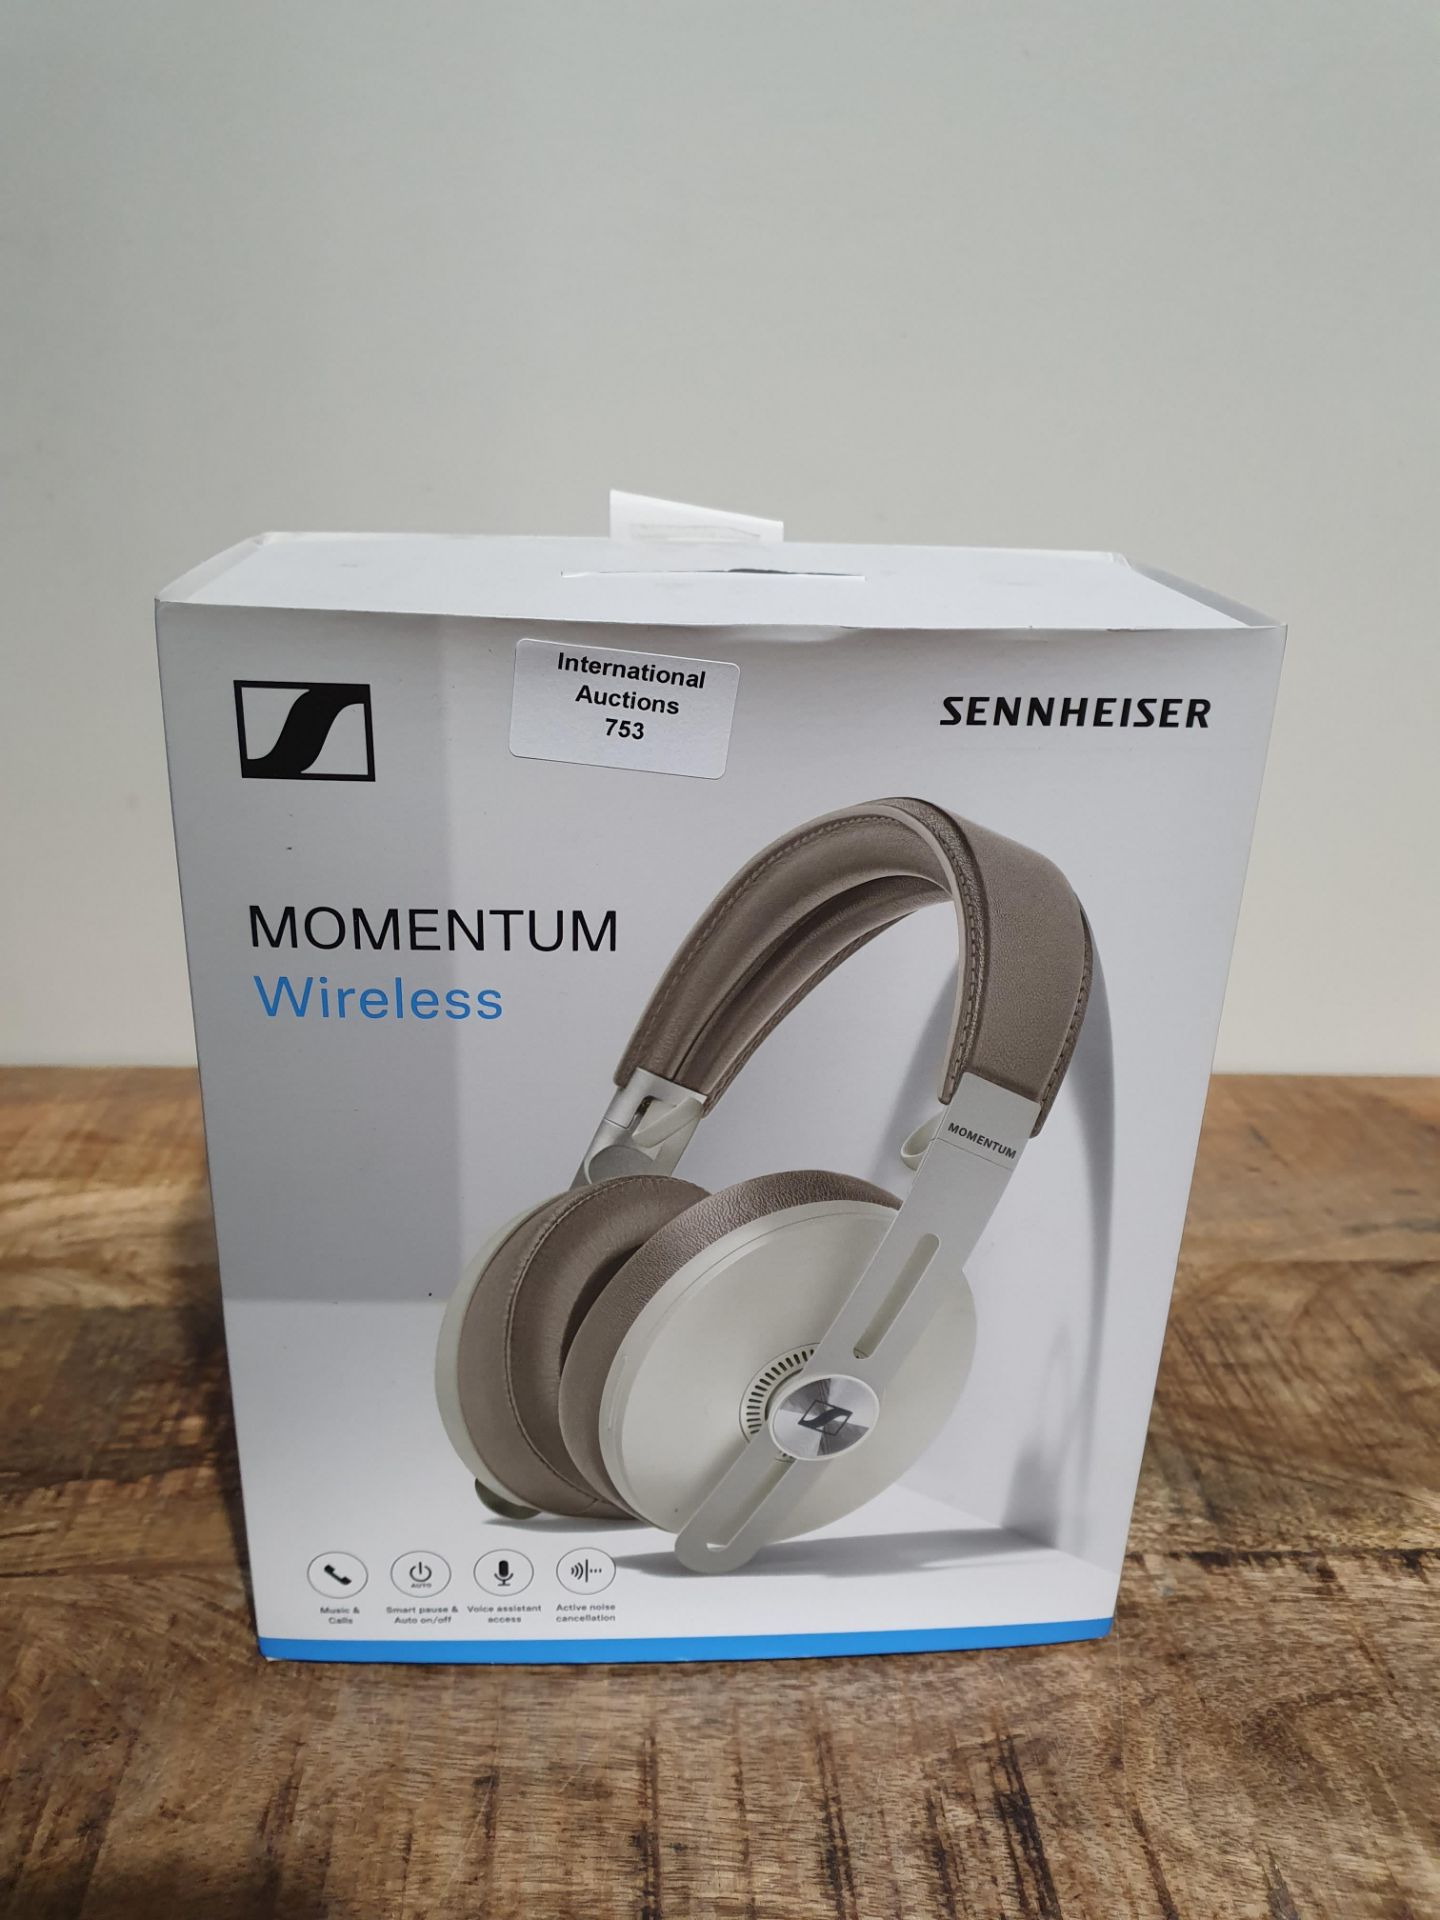 SENNHEISER MOMENTUM WIRELESS HEADPHONES RRP £220Condition ReportAppraisal Available on Request - All